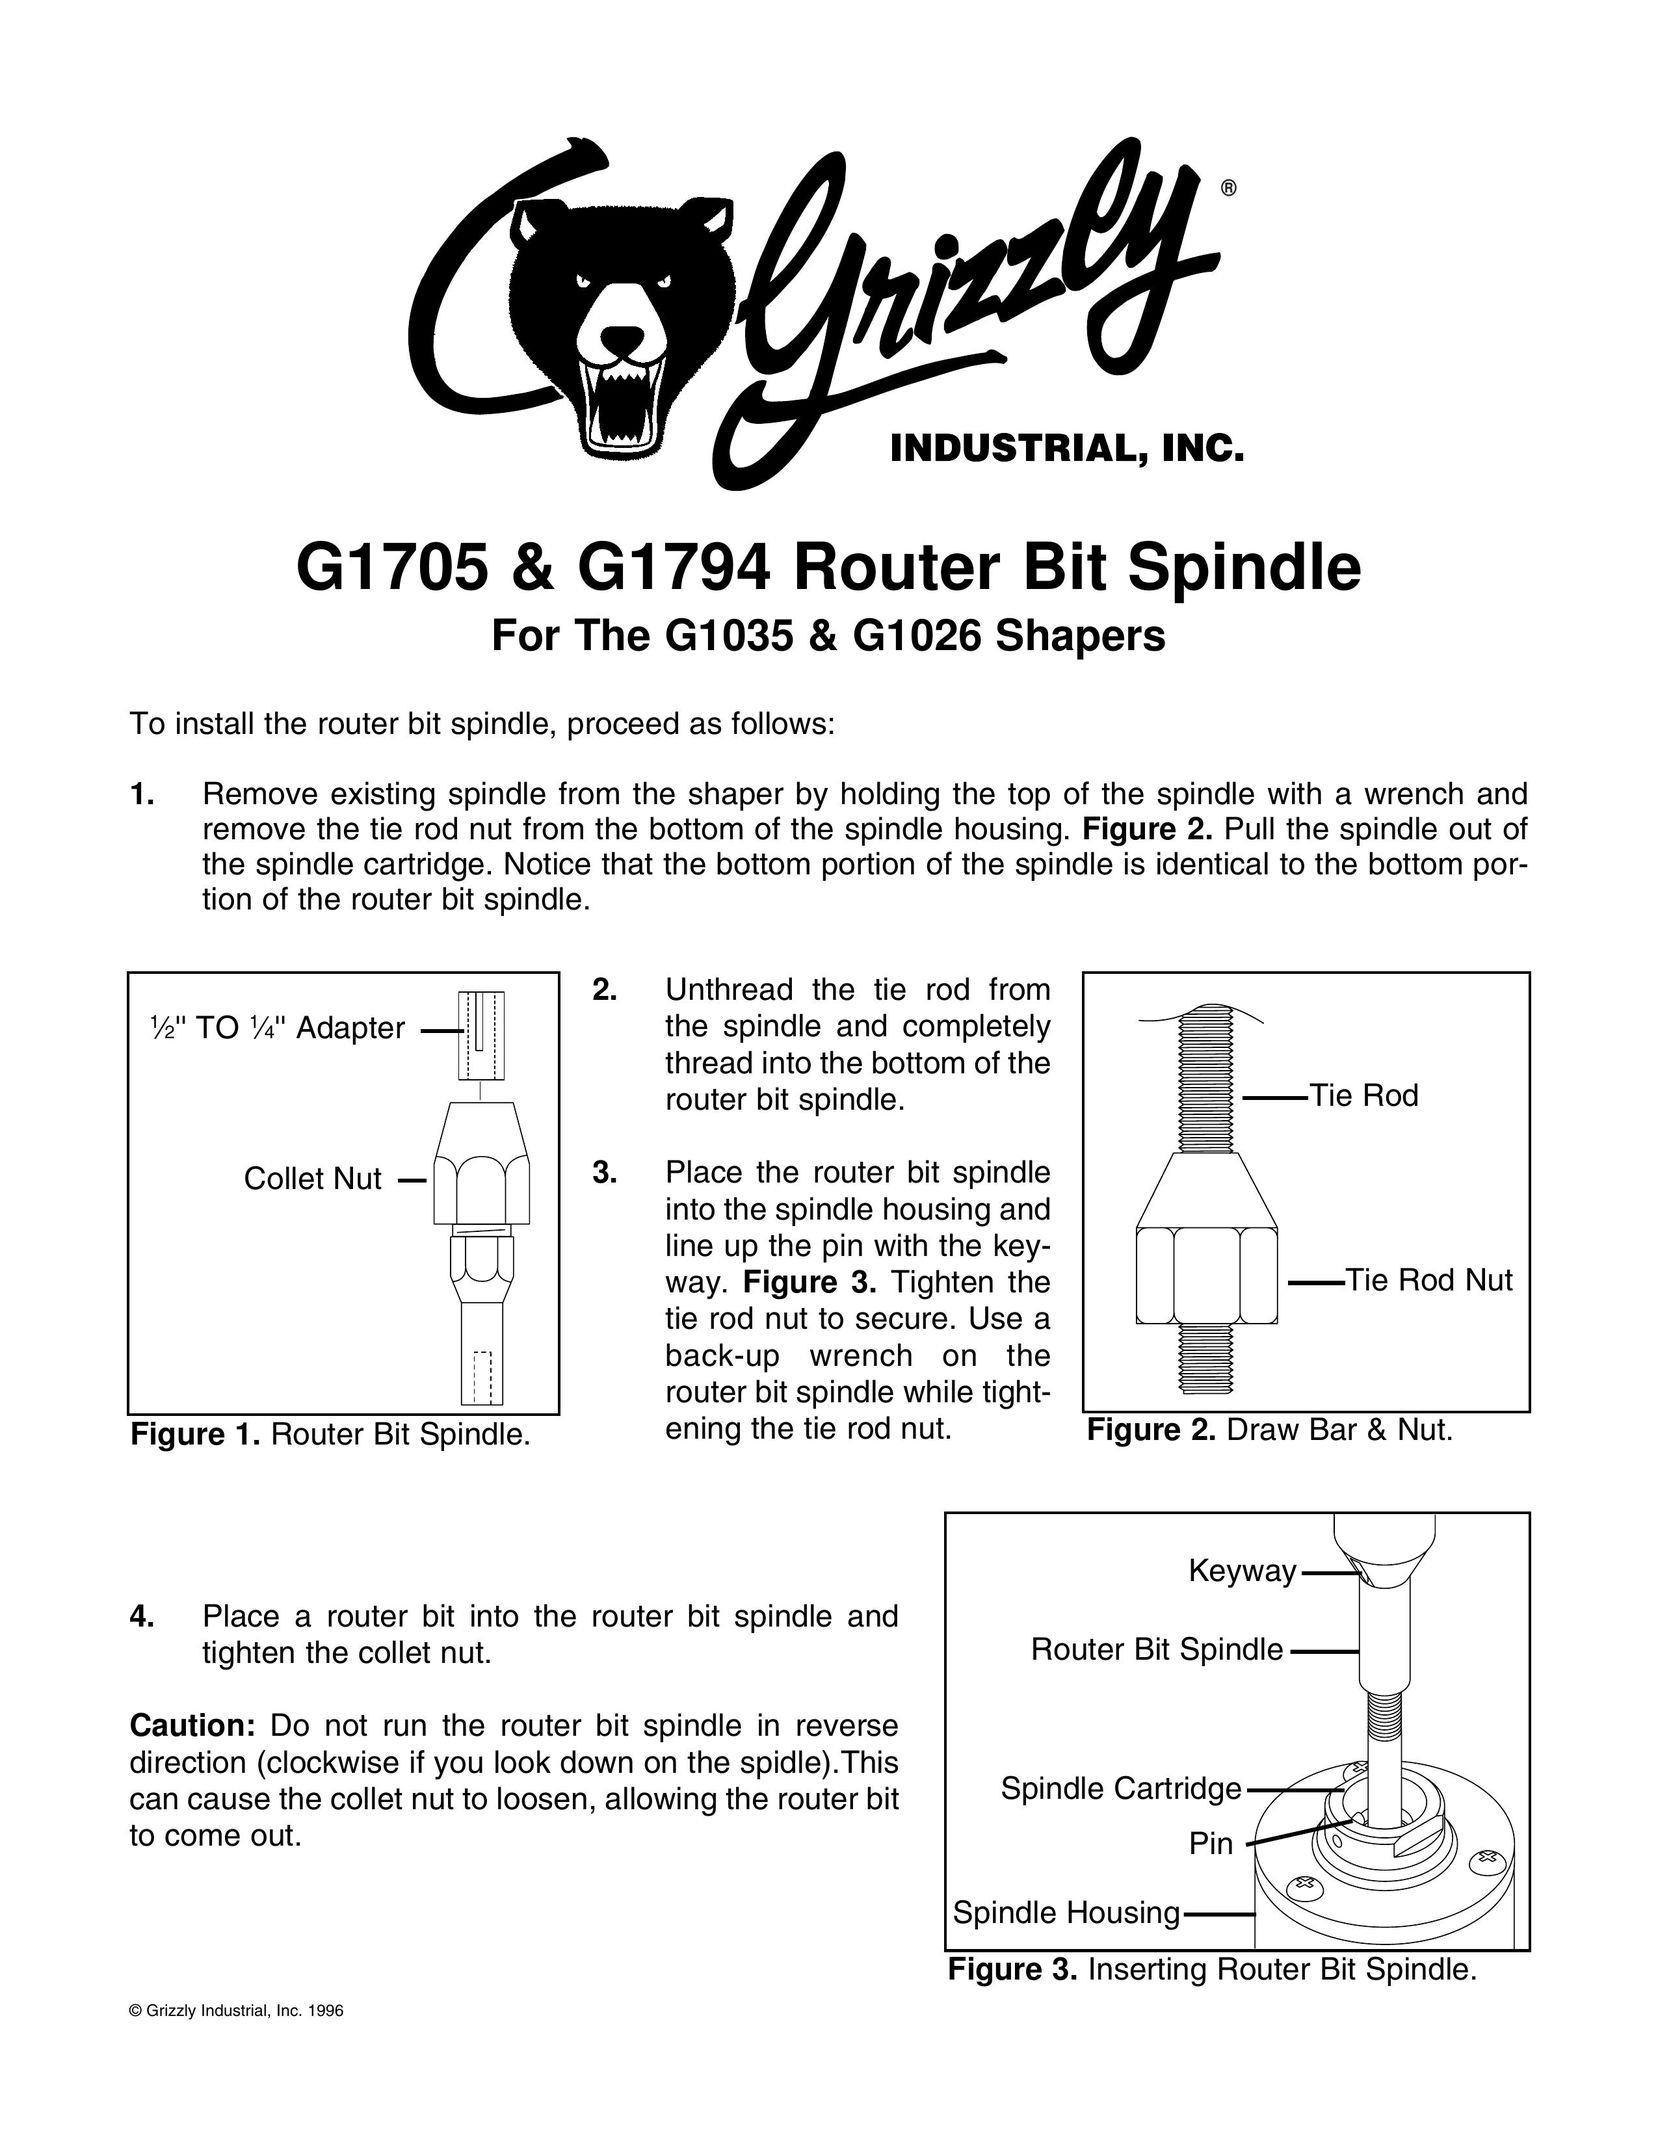 Grizzly G1026 Network Router User Manual